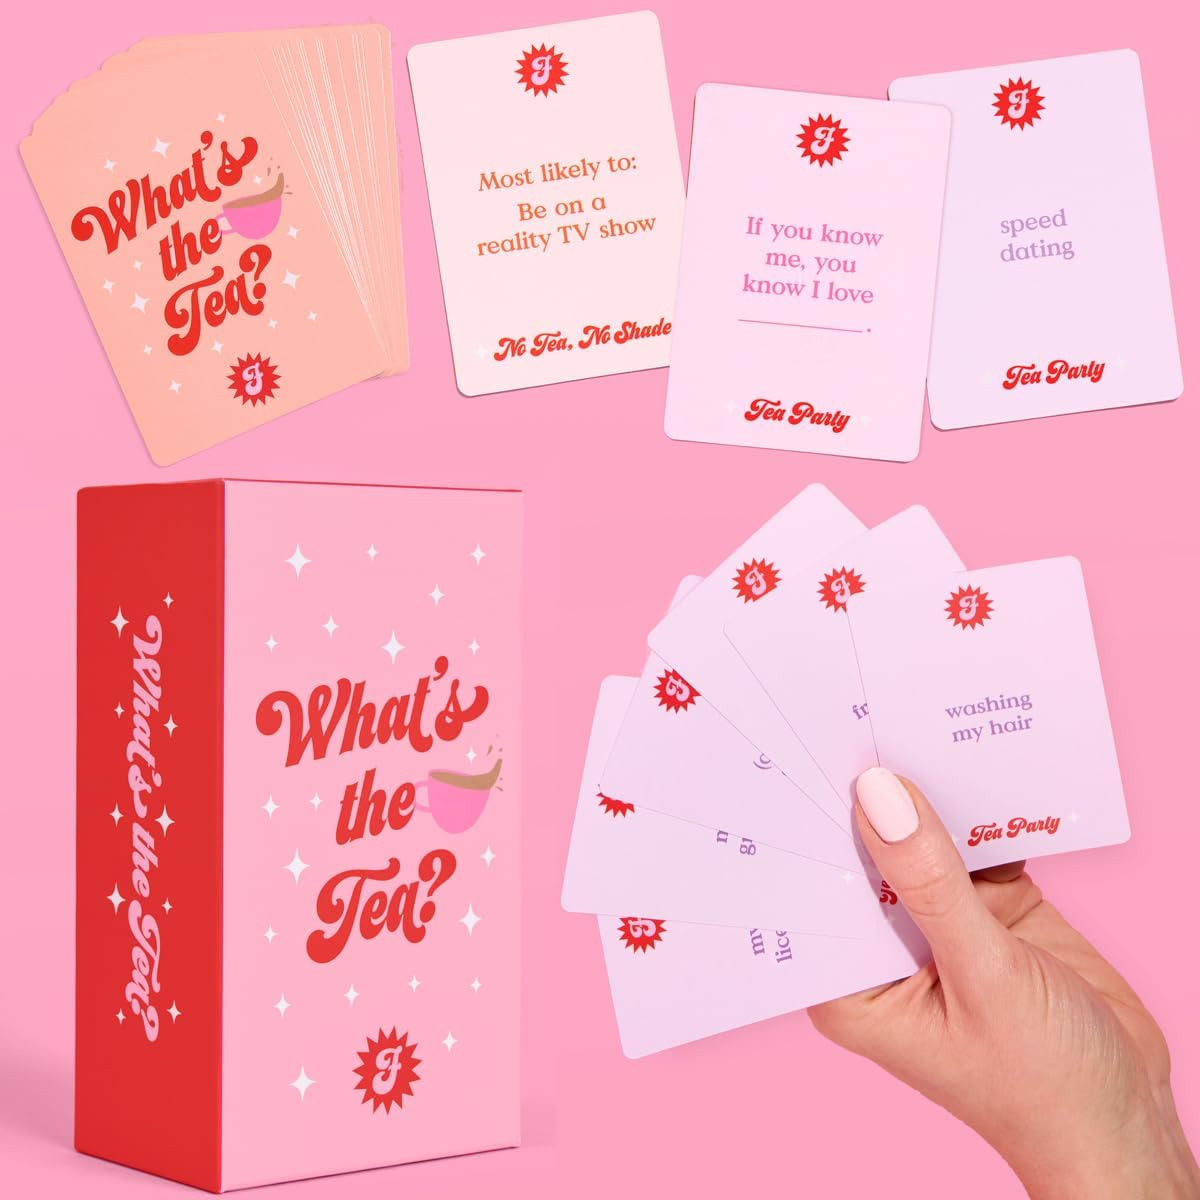  the Tea? Playing Card Game | Bachelorette Party Activity, Cute Birthday 